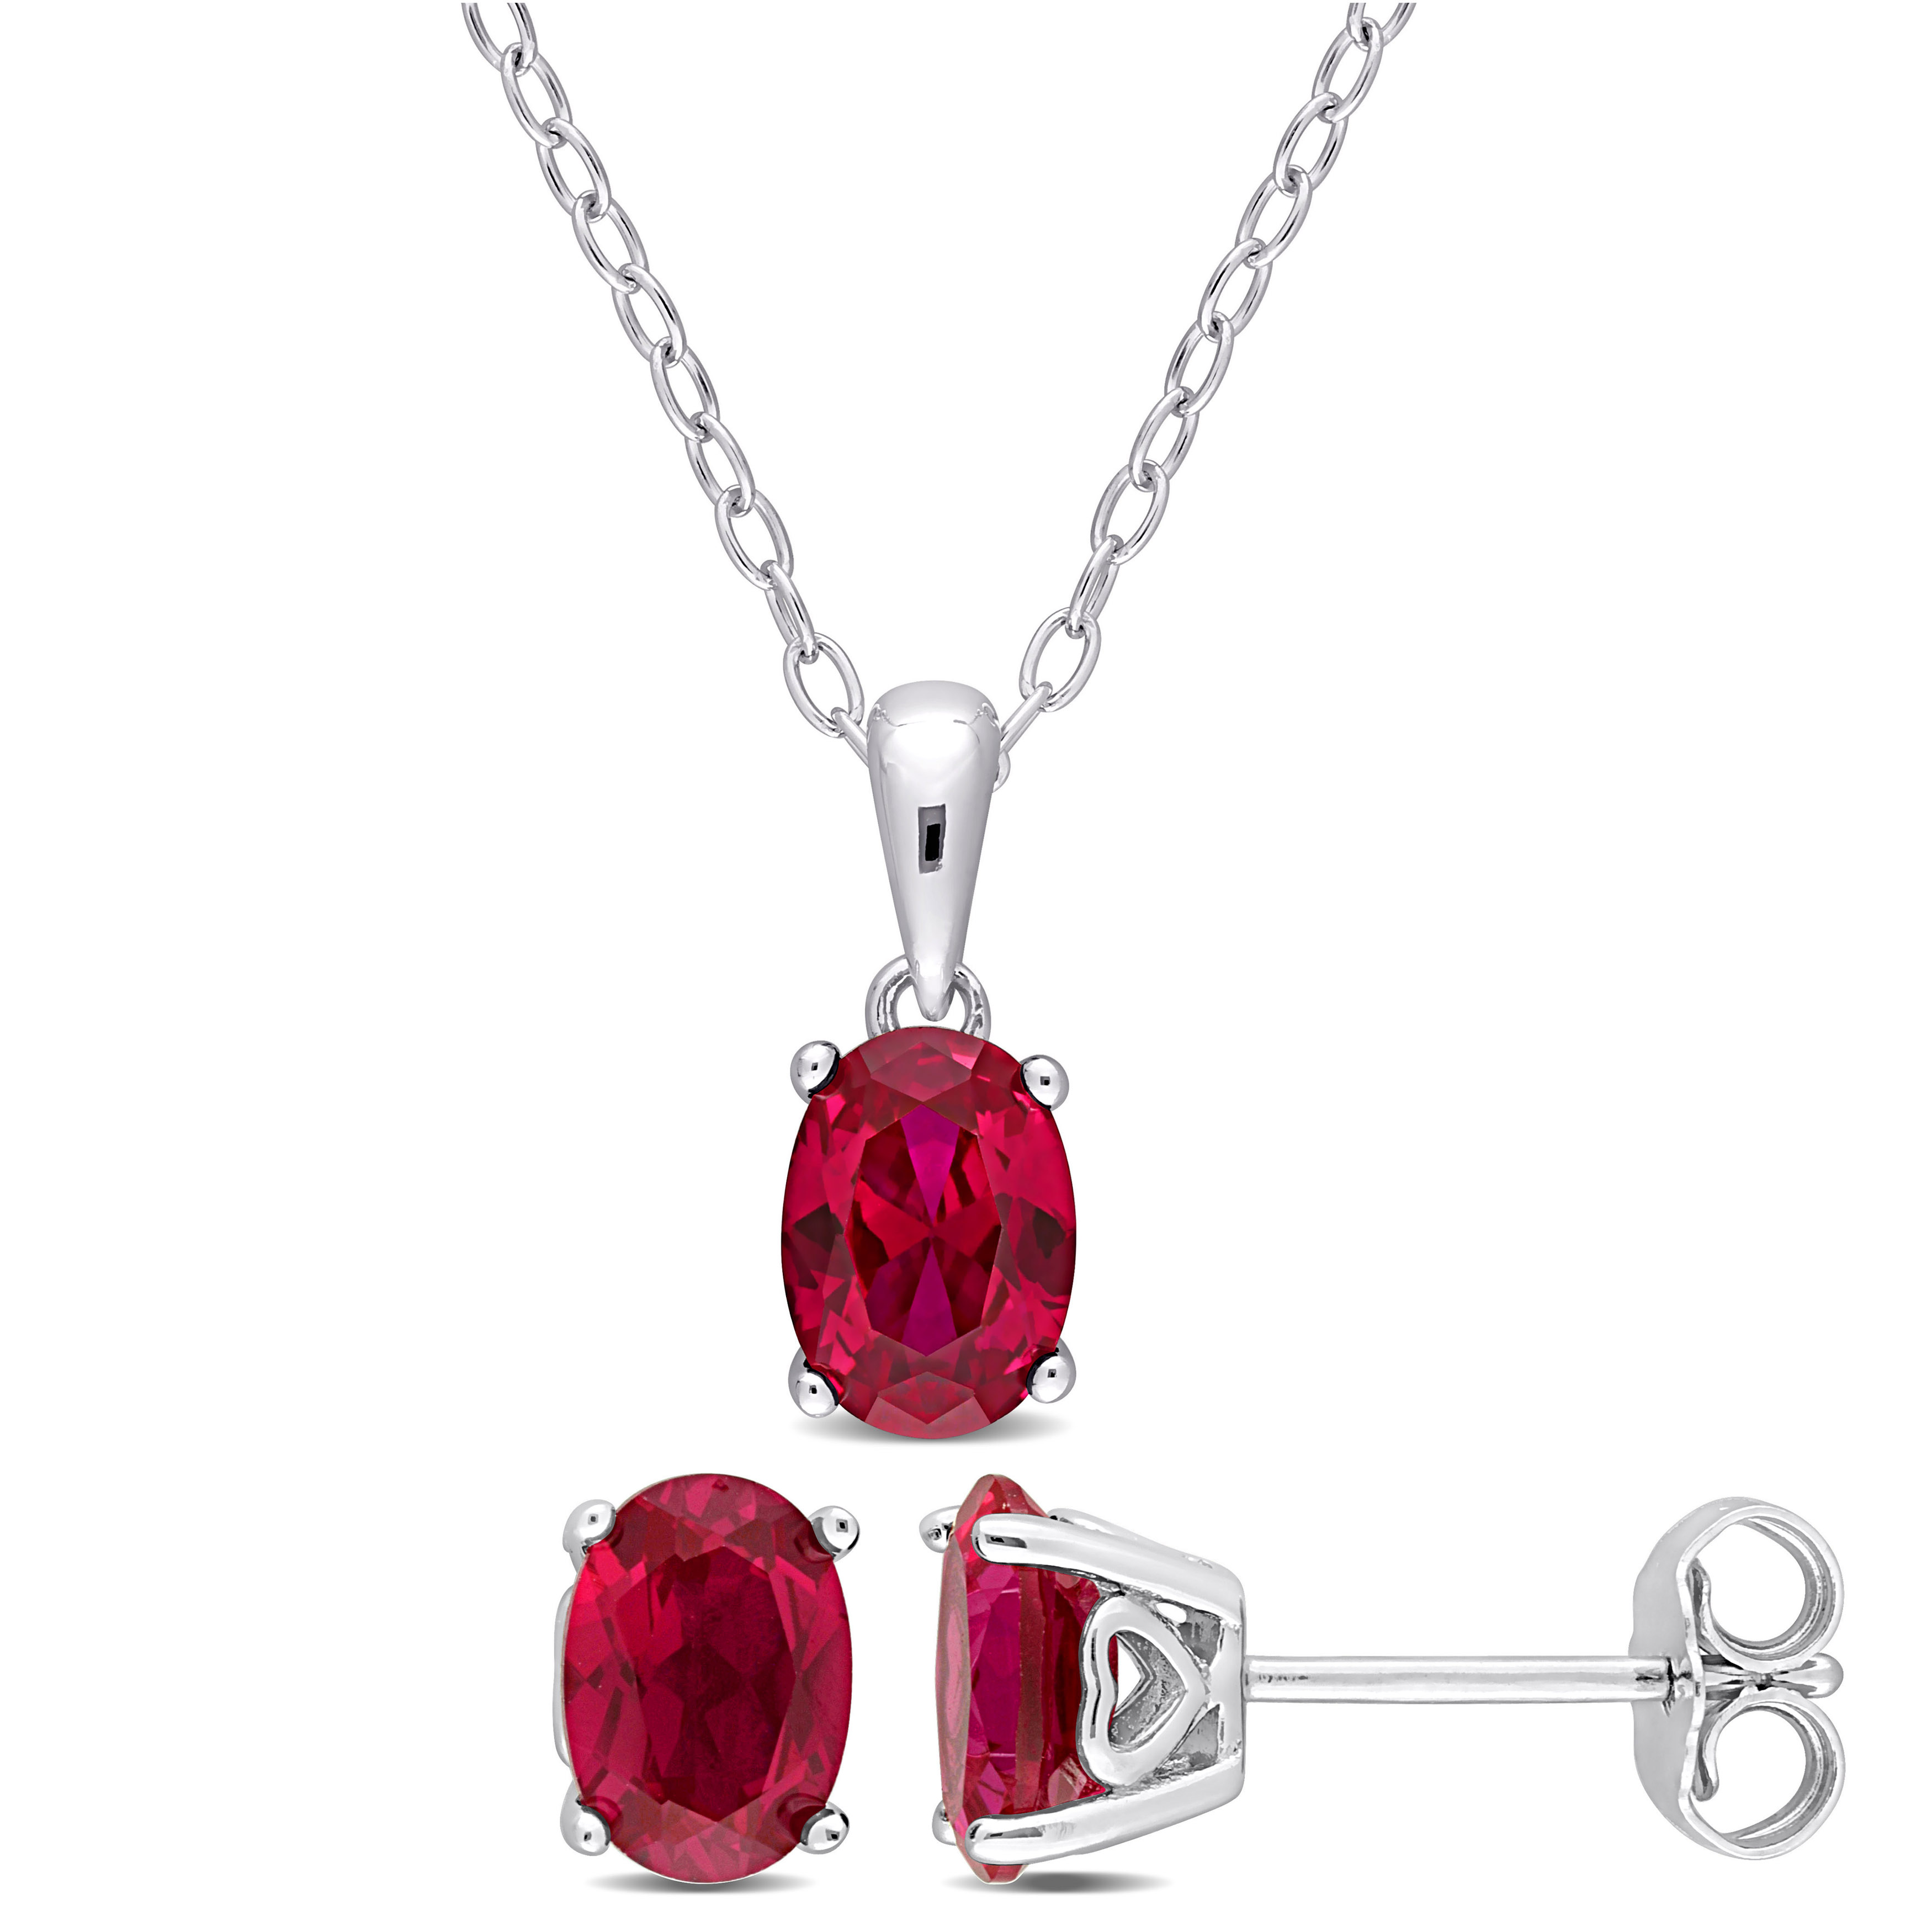 3 4/5 CT TGW Oval Created Ruby 2-Piece Solitaire Pendant with Chain and Stud Earrings Set in Sterling Silver